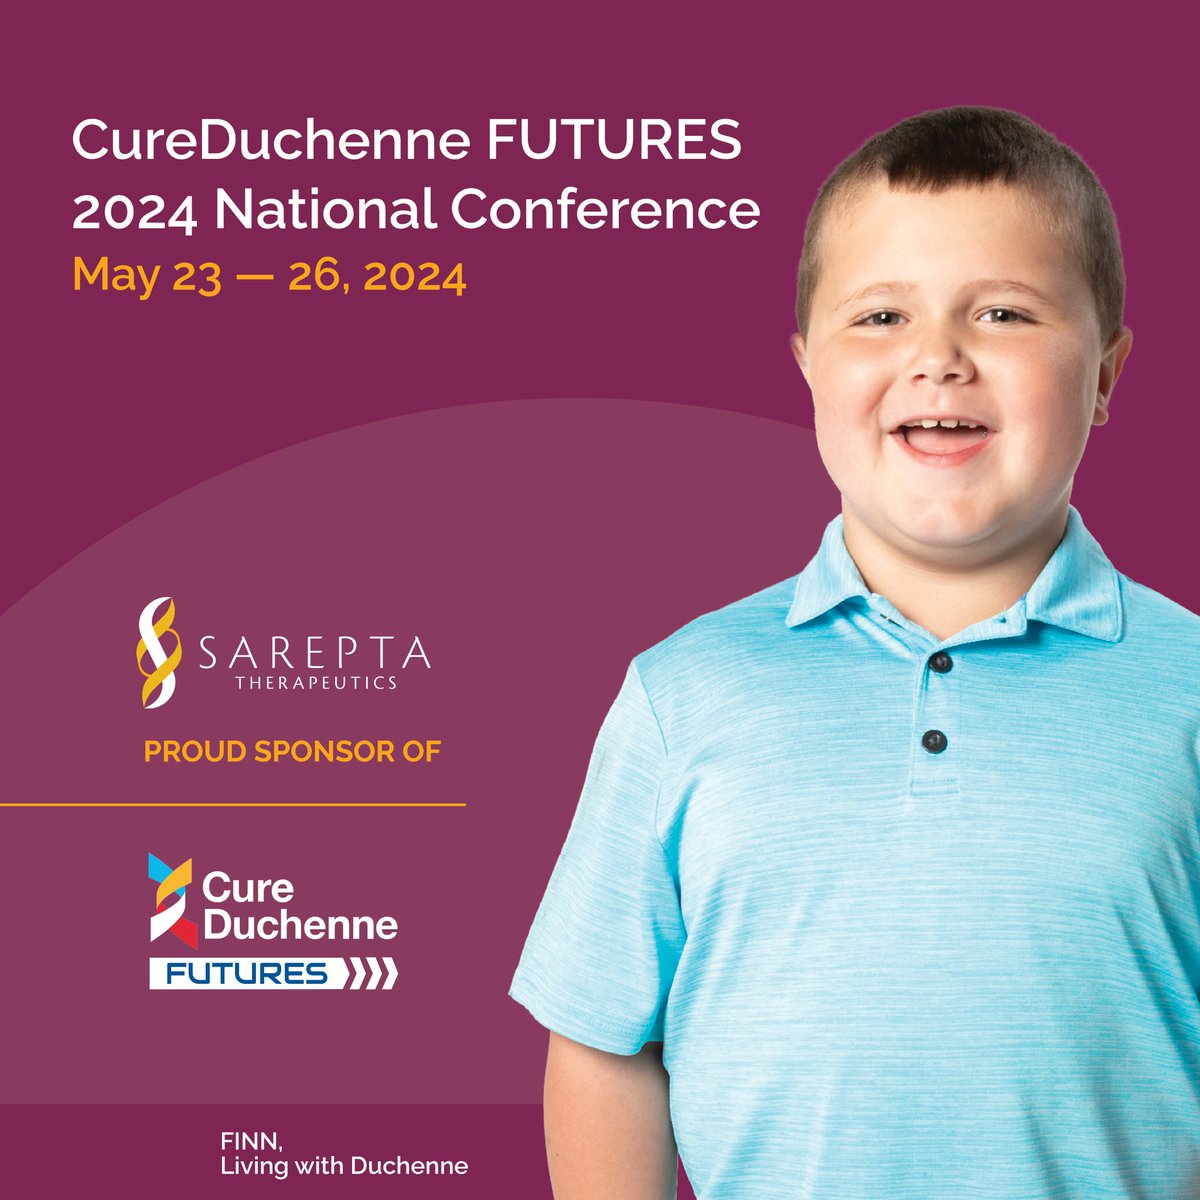 Are you attending @CureDuchenne FUTURES and have a question for Sarepta? Our team is available throughout the conference at our two booths and our Lego activity. Hope to see you there!